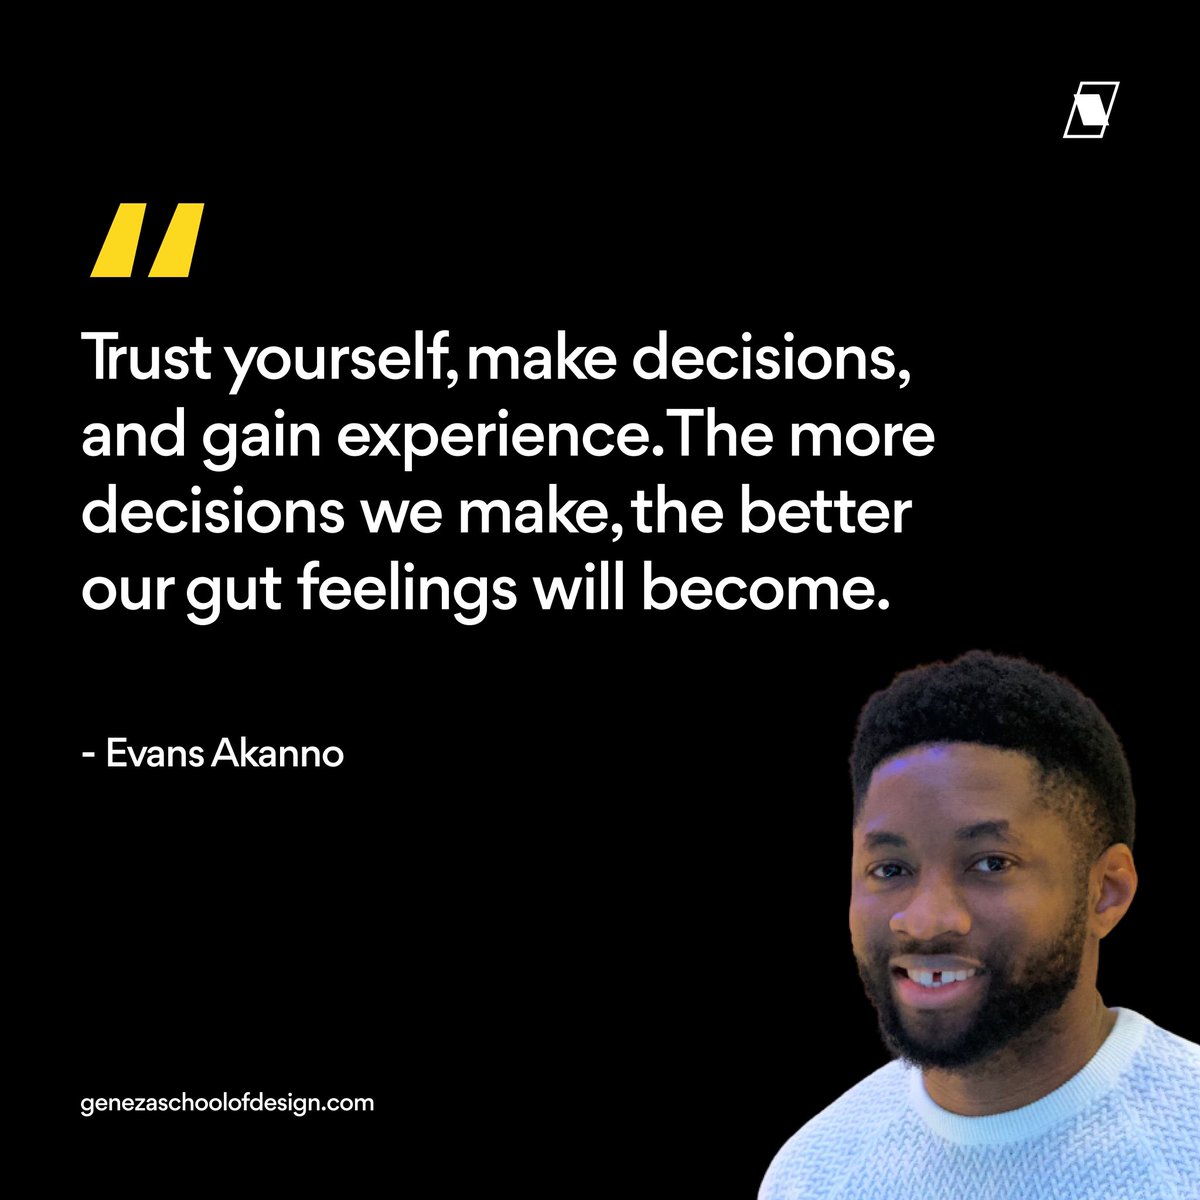 Believe in your instincts, make bold decisions, and embrace the journey of gaining experience. 

Each decision you make, big or small, shapes your intuition and refines your ability to navigate the creative realm. 

Thank you @evansakanno for the inspiring quote😍

#Mondayquote